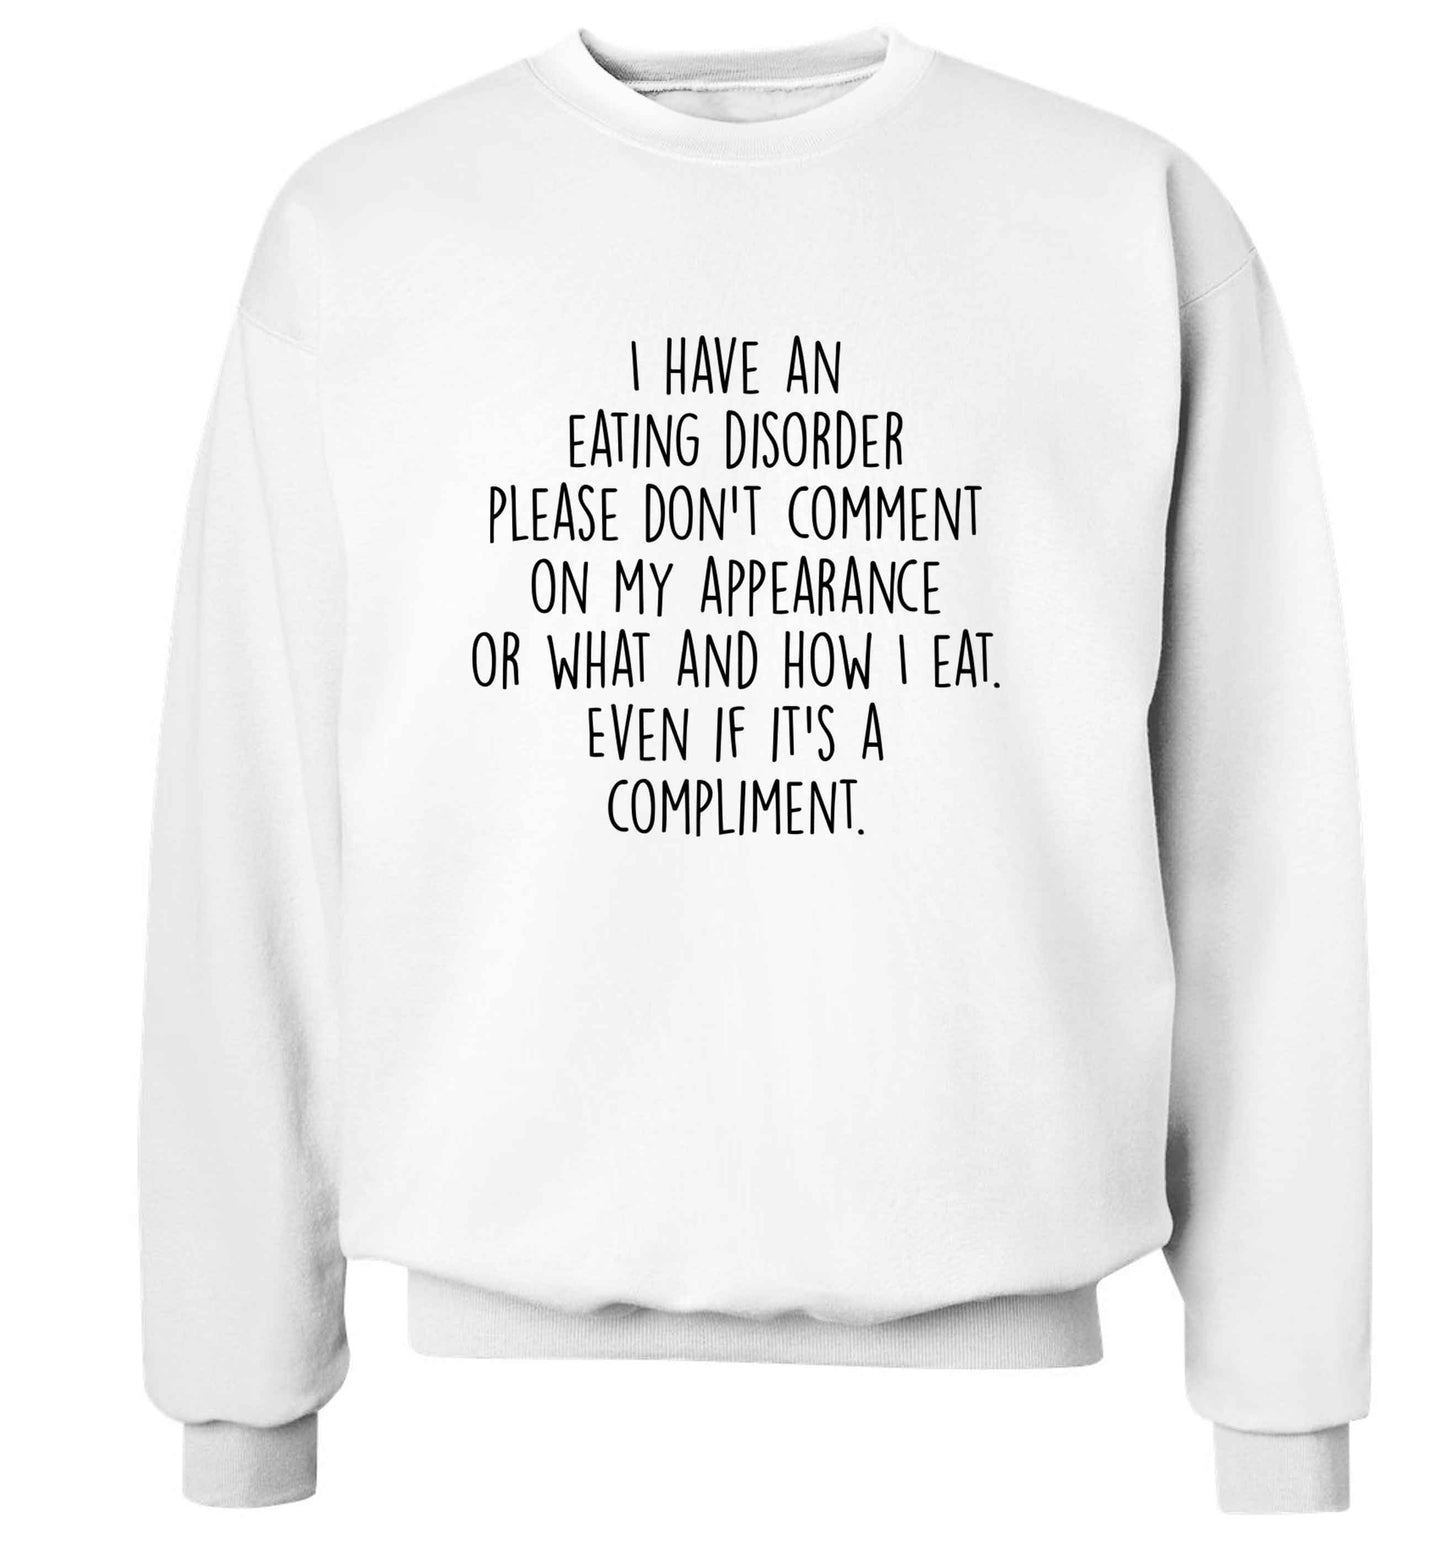 I have an eating disorder please don't comment on my appearance or what and how I eat. Even if it's a compliment adult's unisex white sweater 2XL